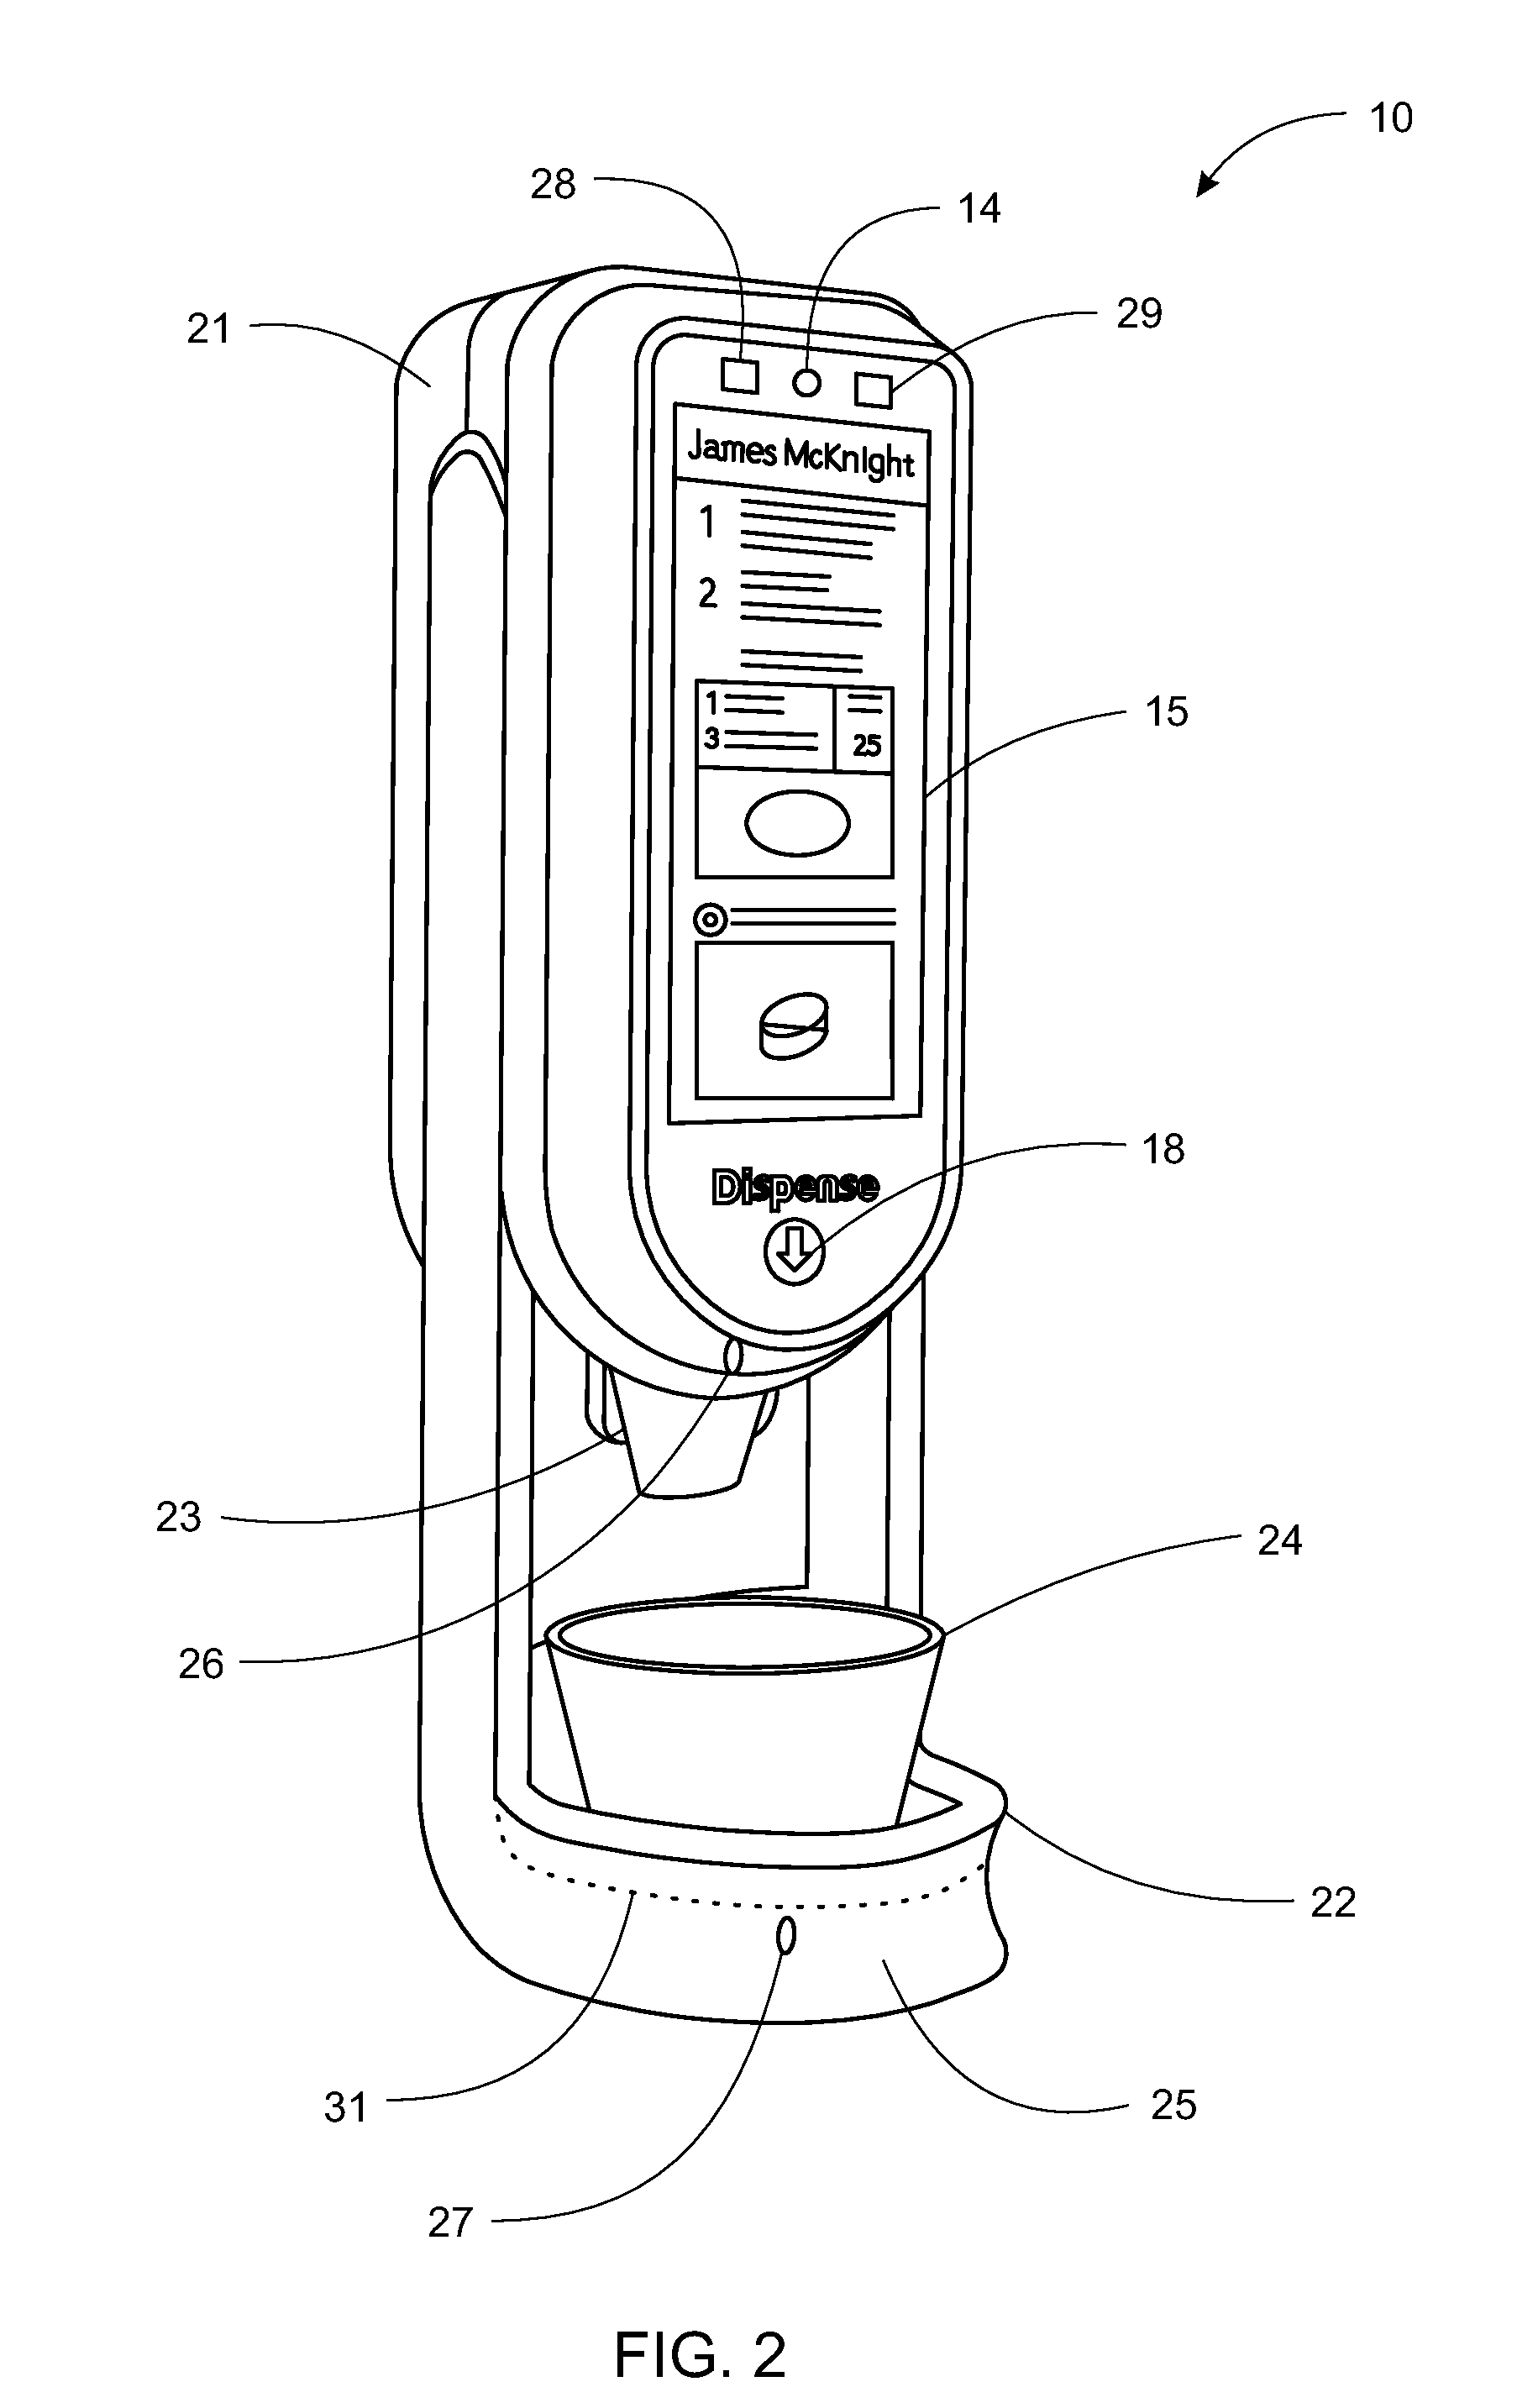 System, Method, and Apparatus for Dispensing Oral Medications